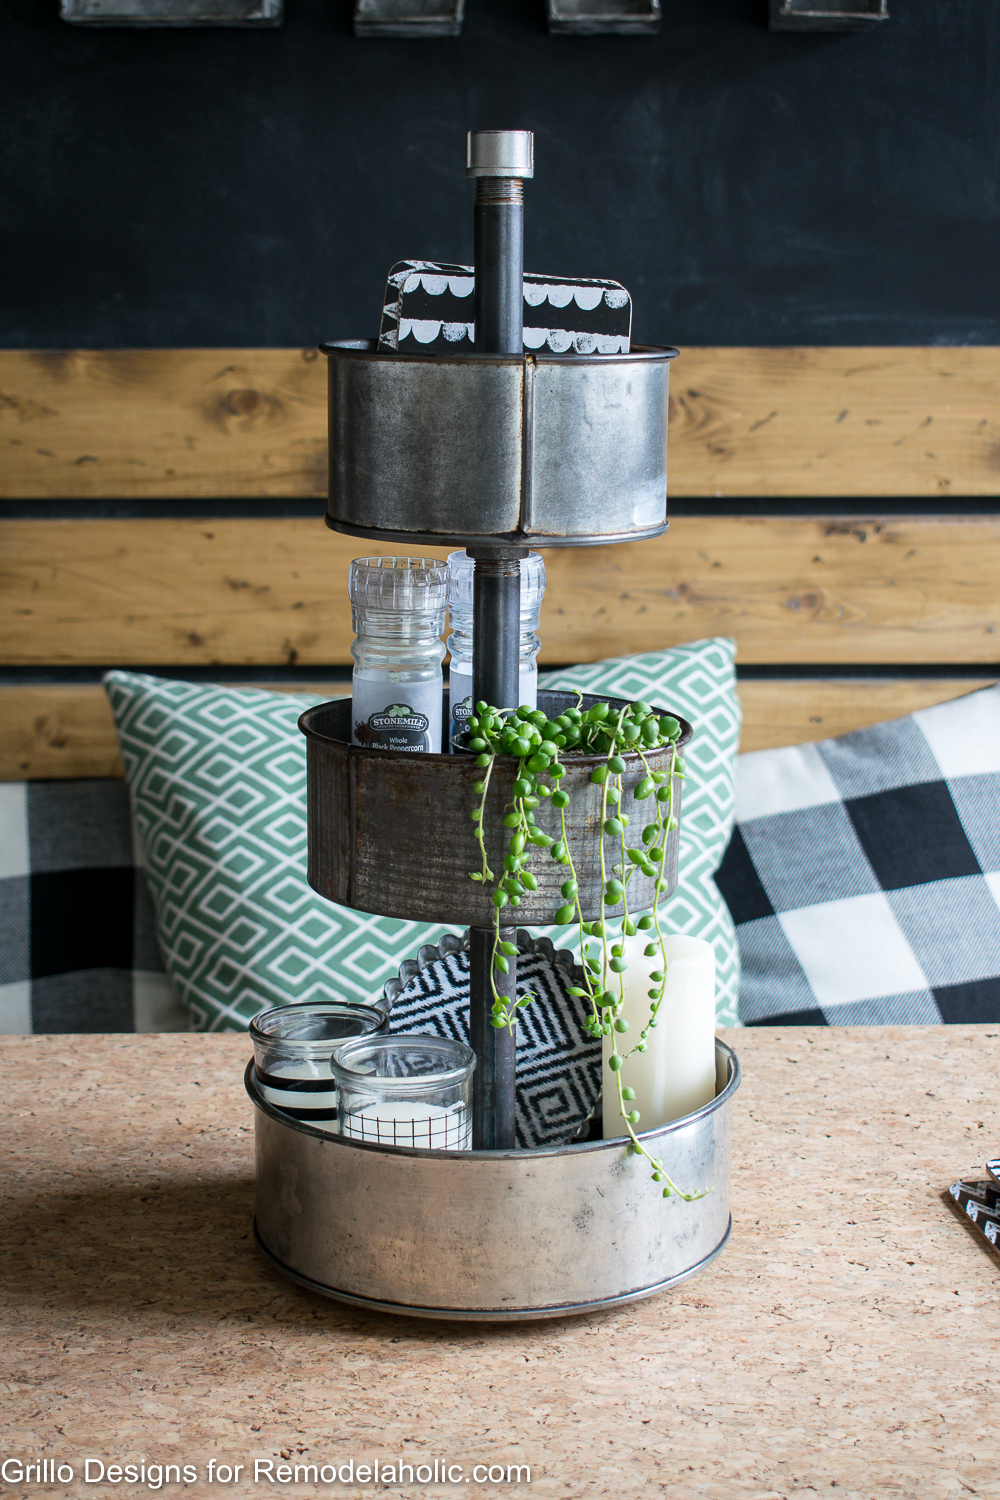 DIY Three-Tiered Stand – From Baking Tins